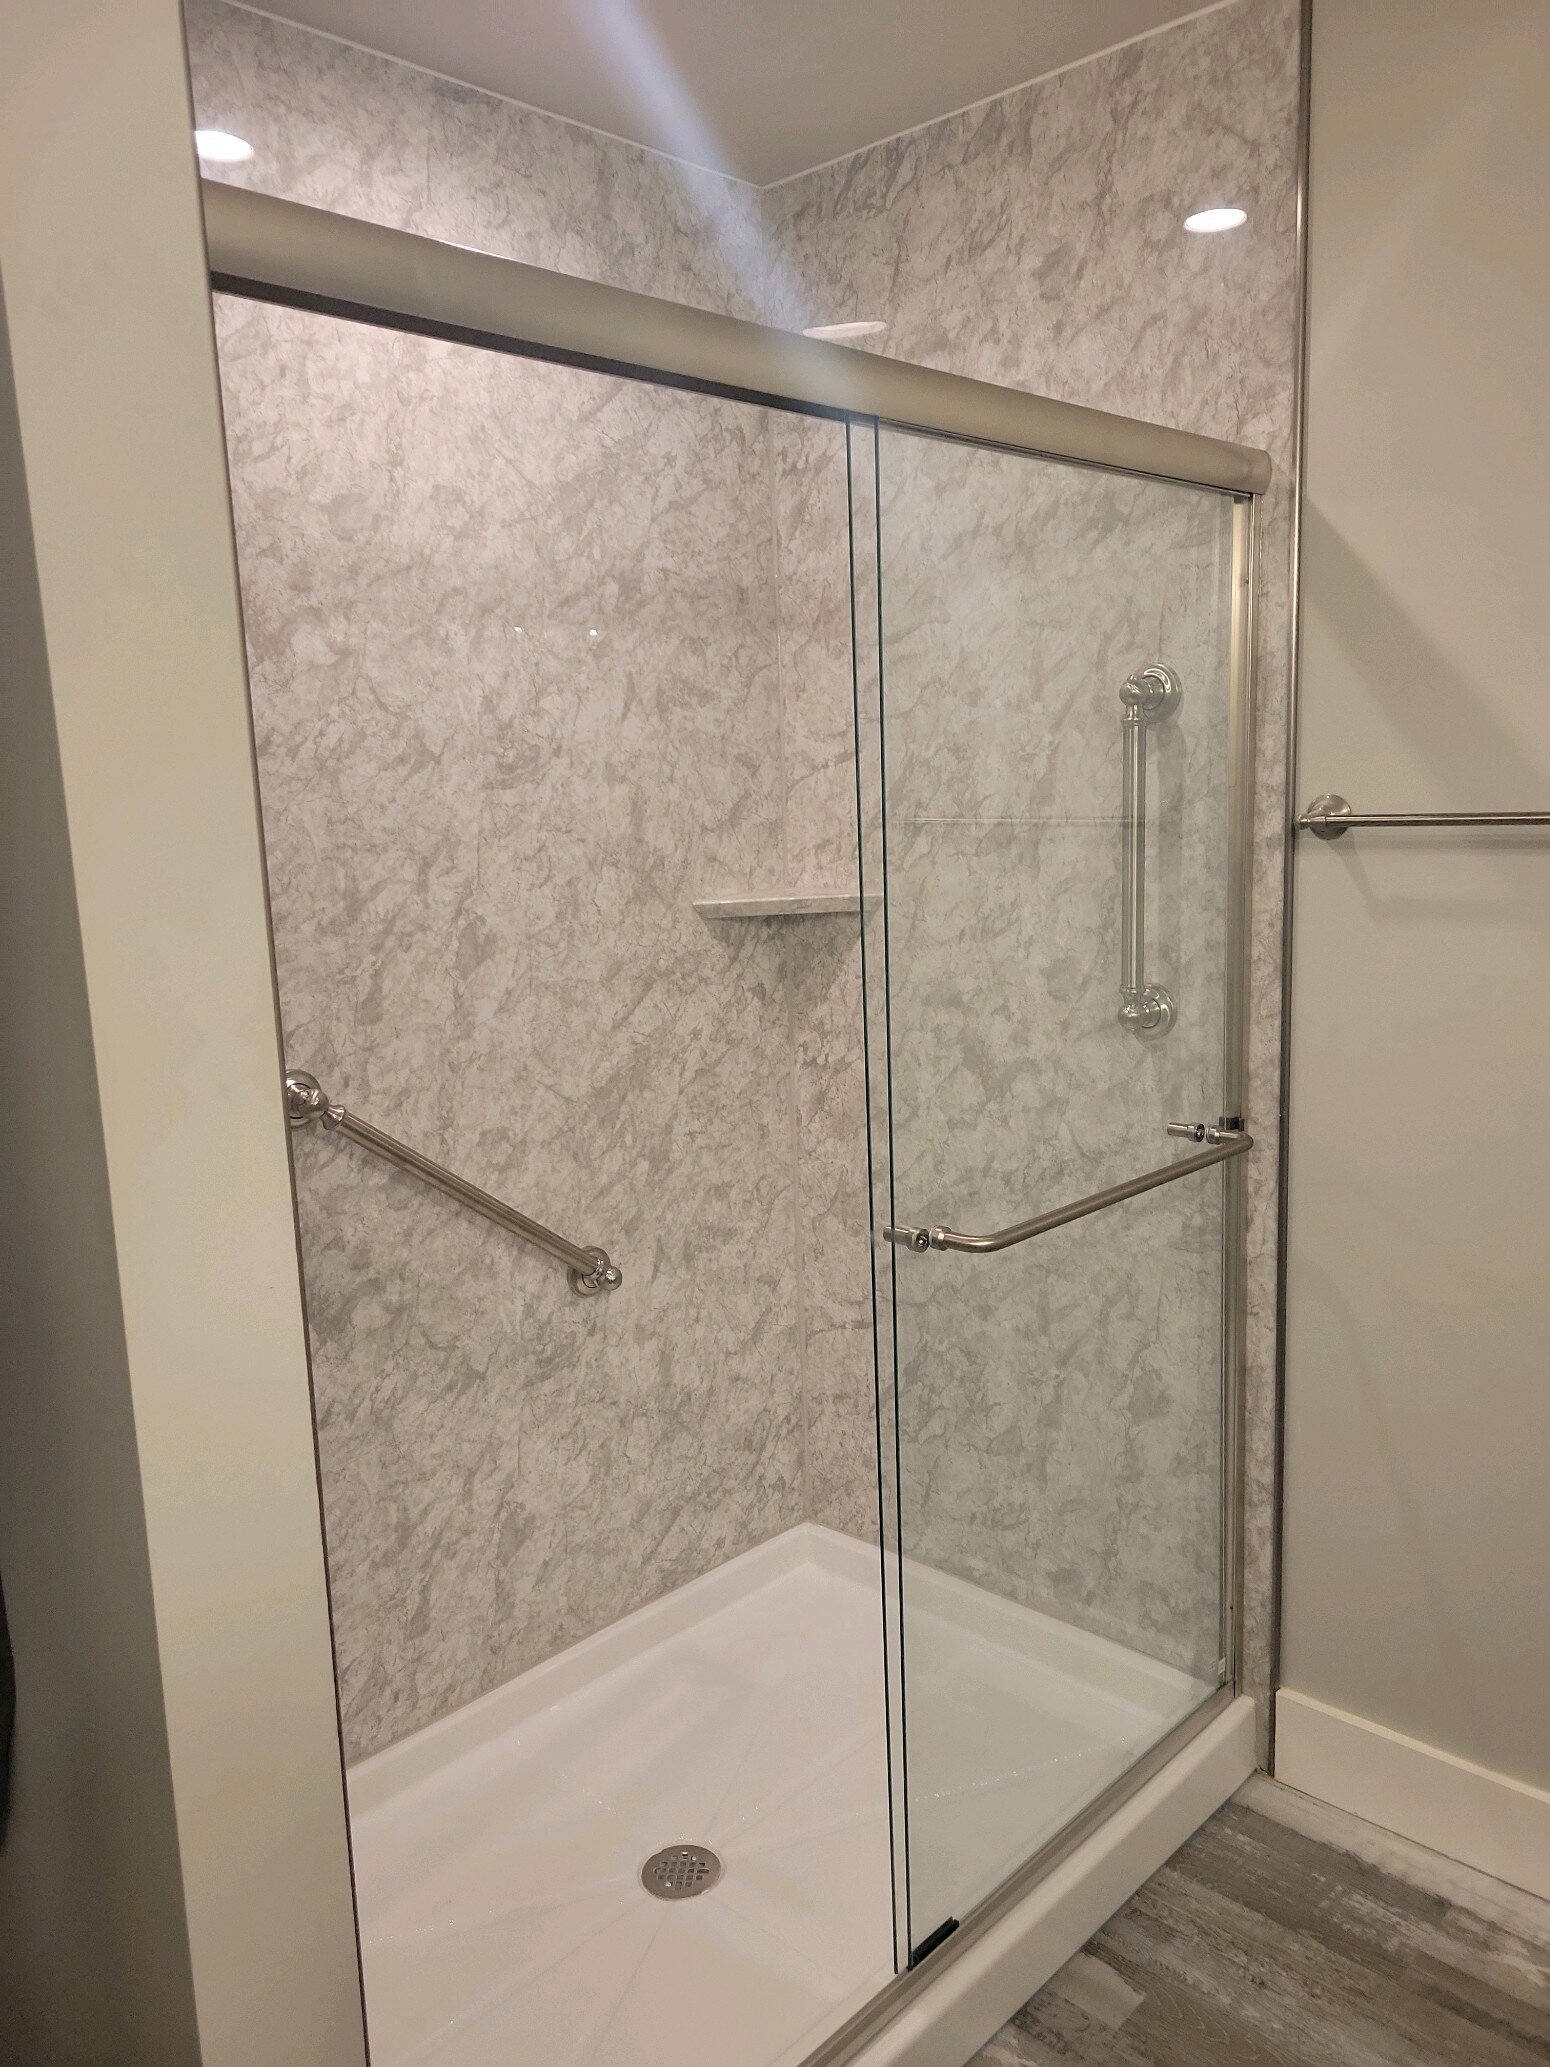 After, Artic Ice walls and white shower pan, beautiful glass doors 